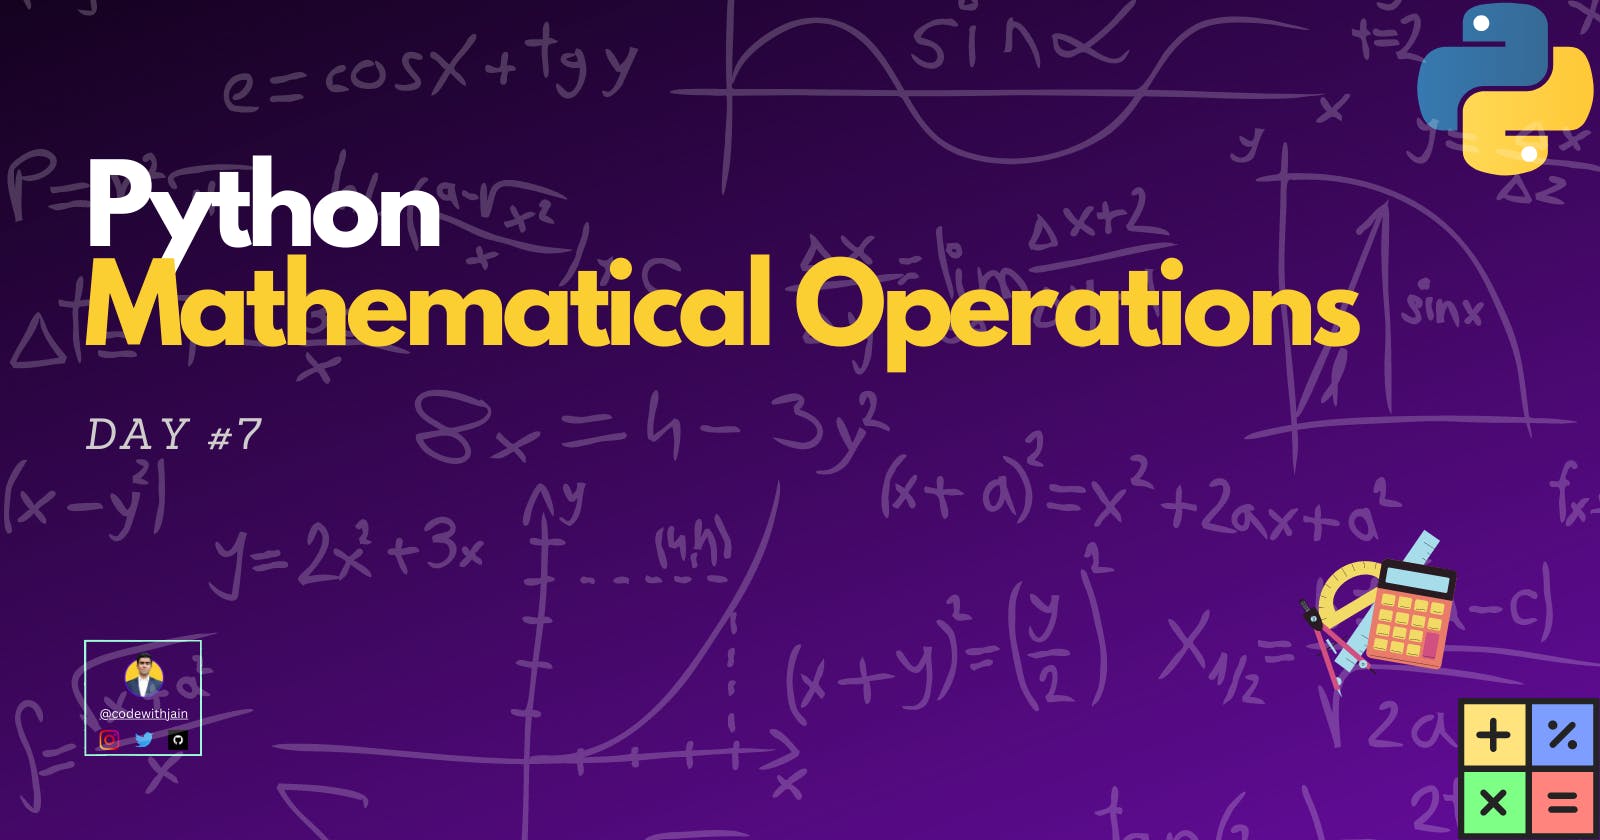 Day #7 - Mathematical Operations in Python